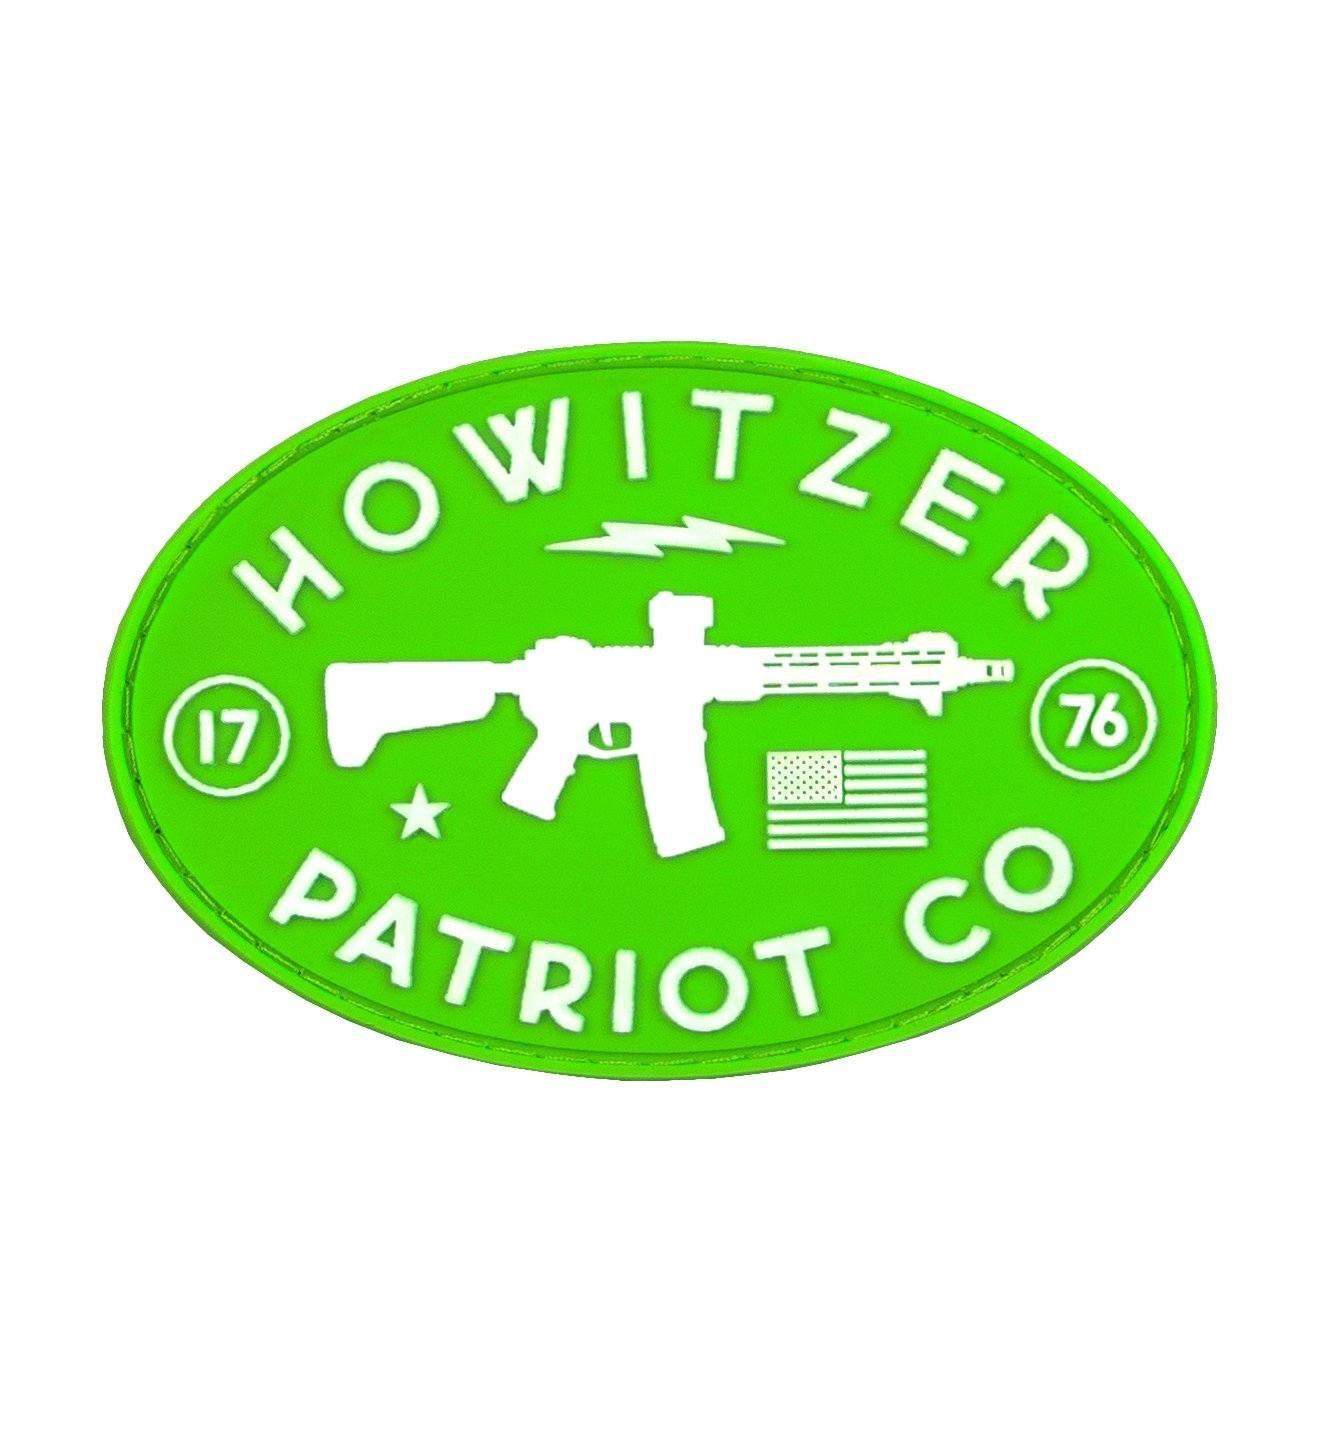 Patriot 76 Morale Patch - Howitzer Clothing